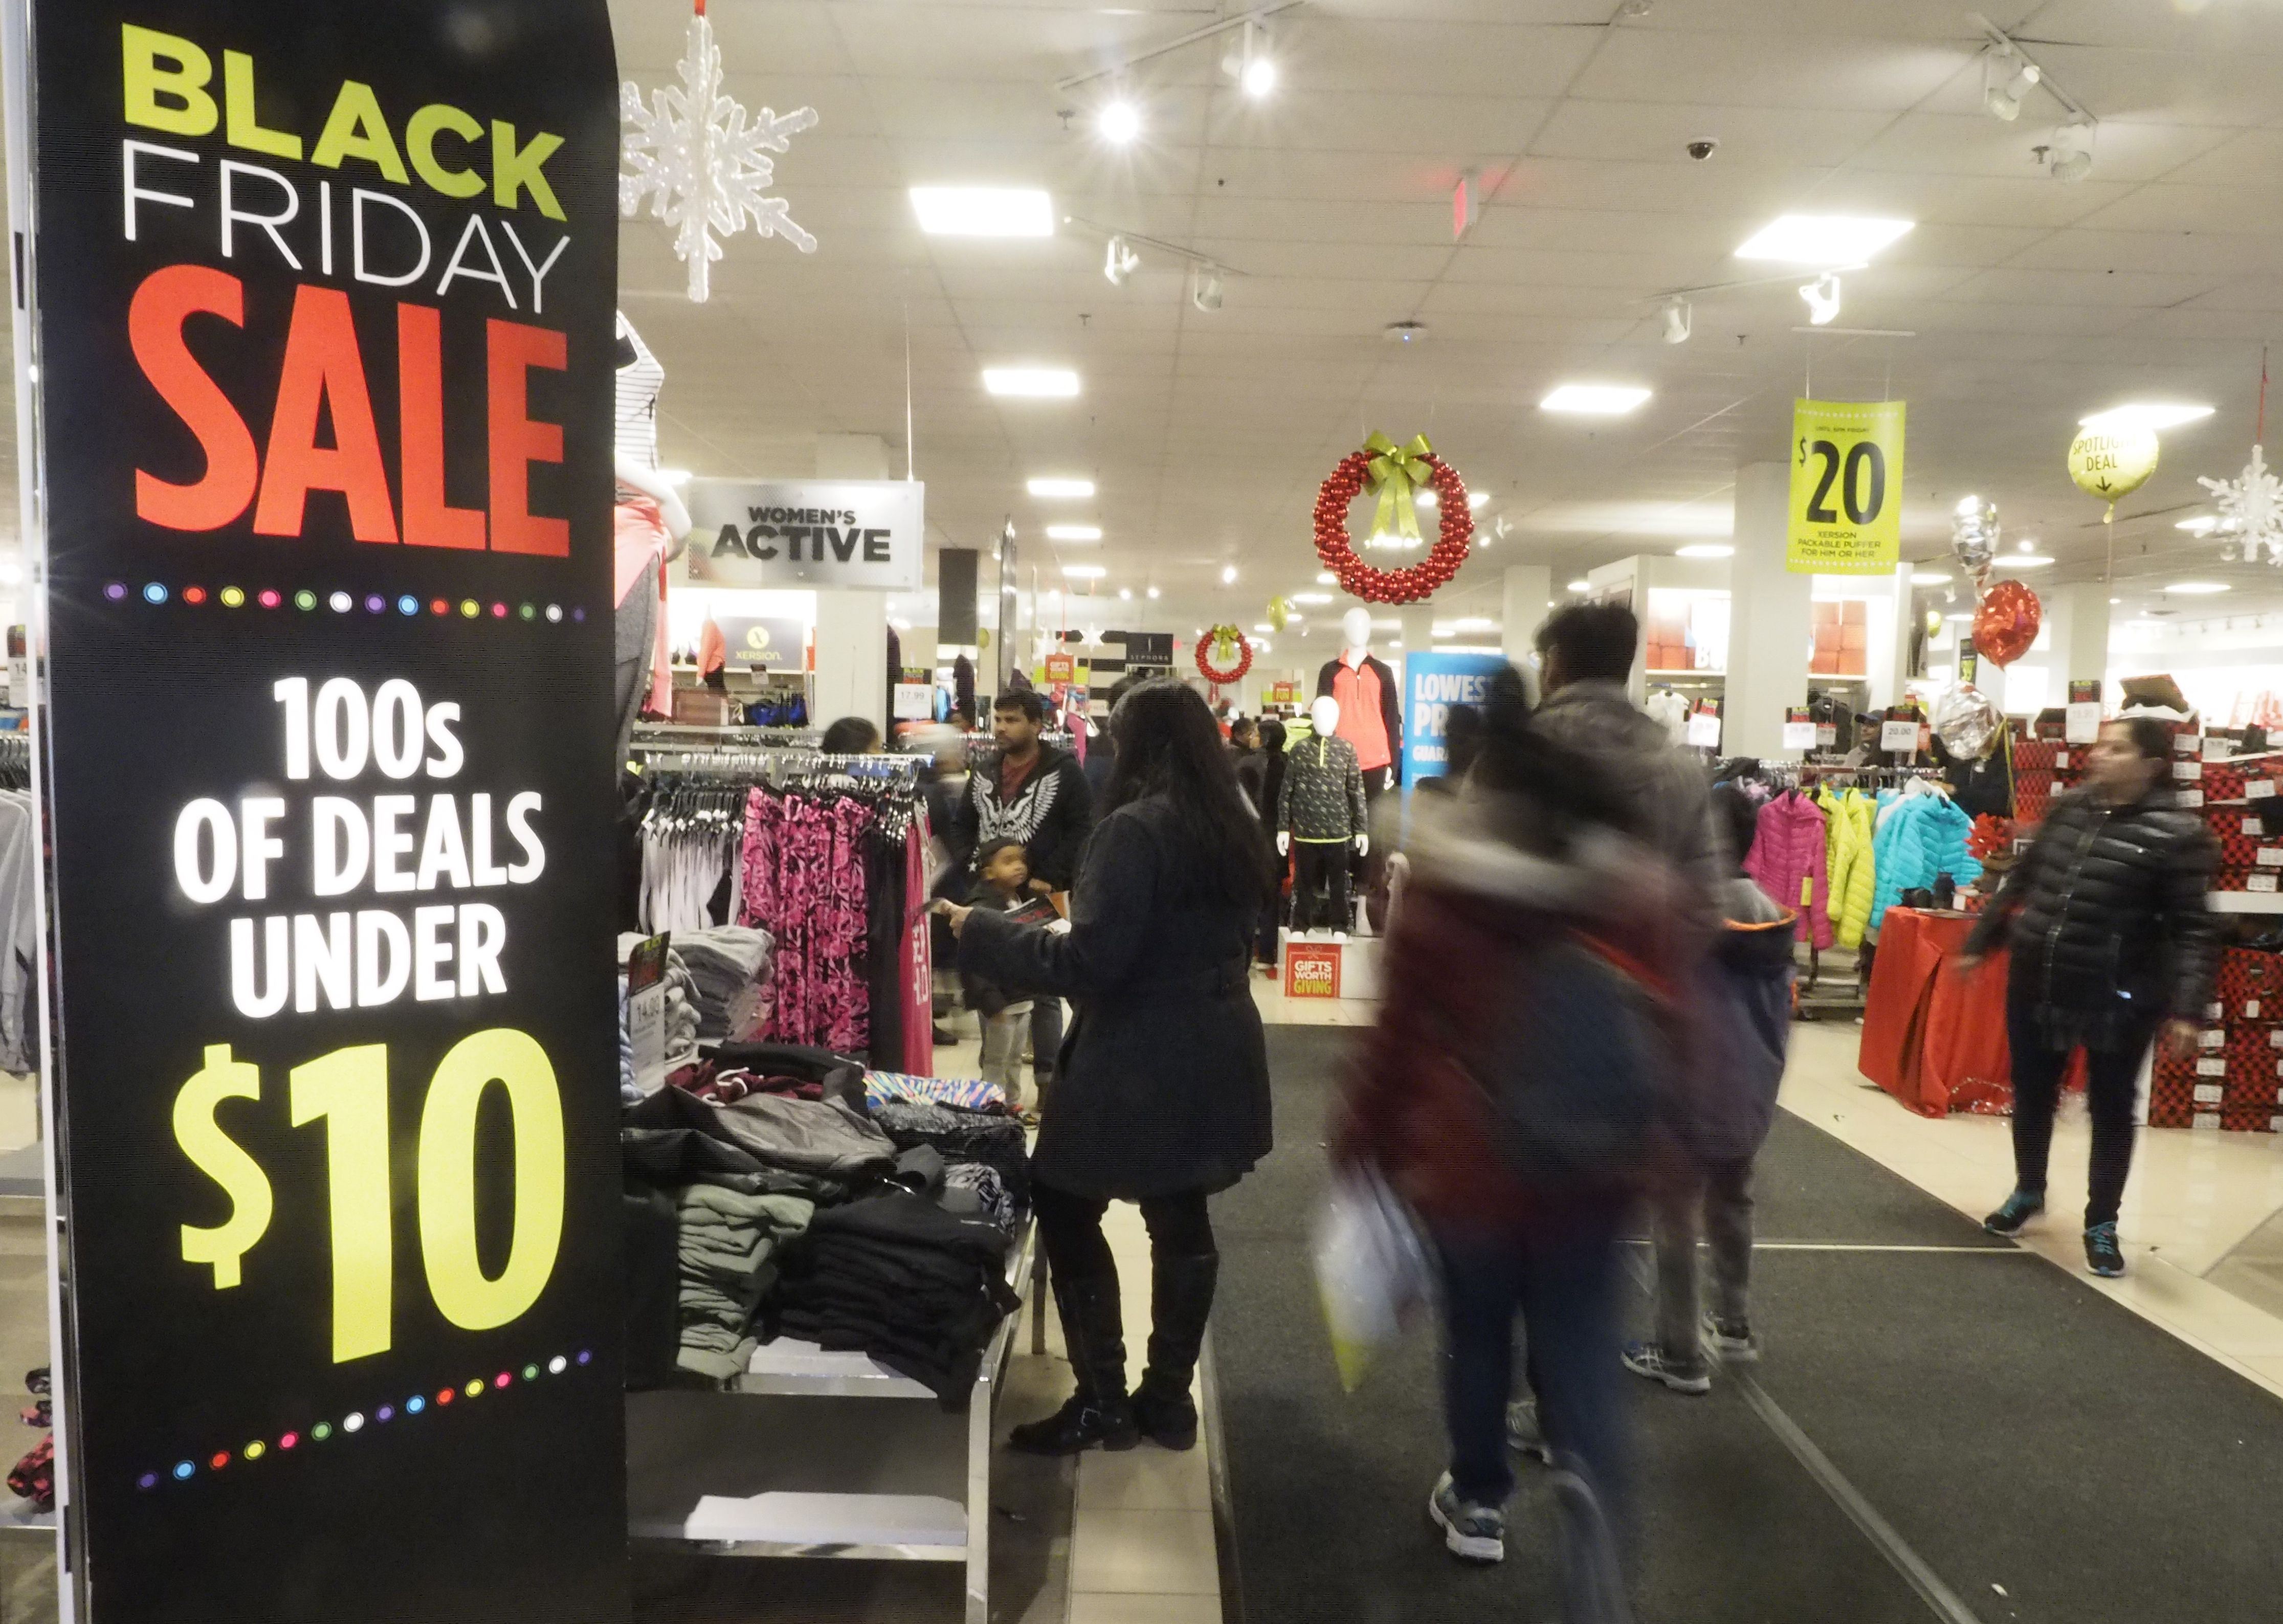 JCPenney Black Friday Ad 2023 – JCPenney Deals, Hours & More